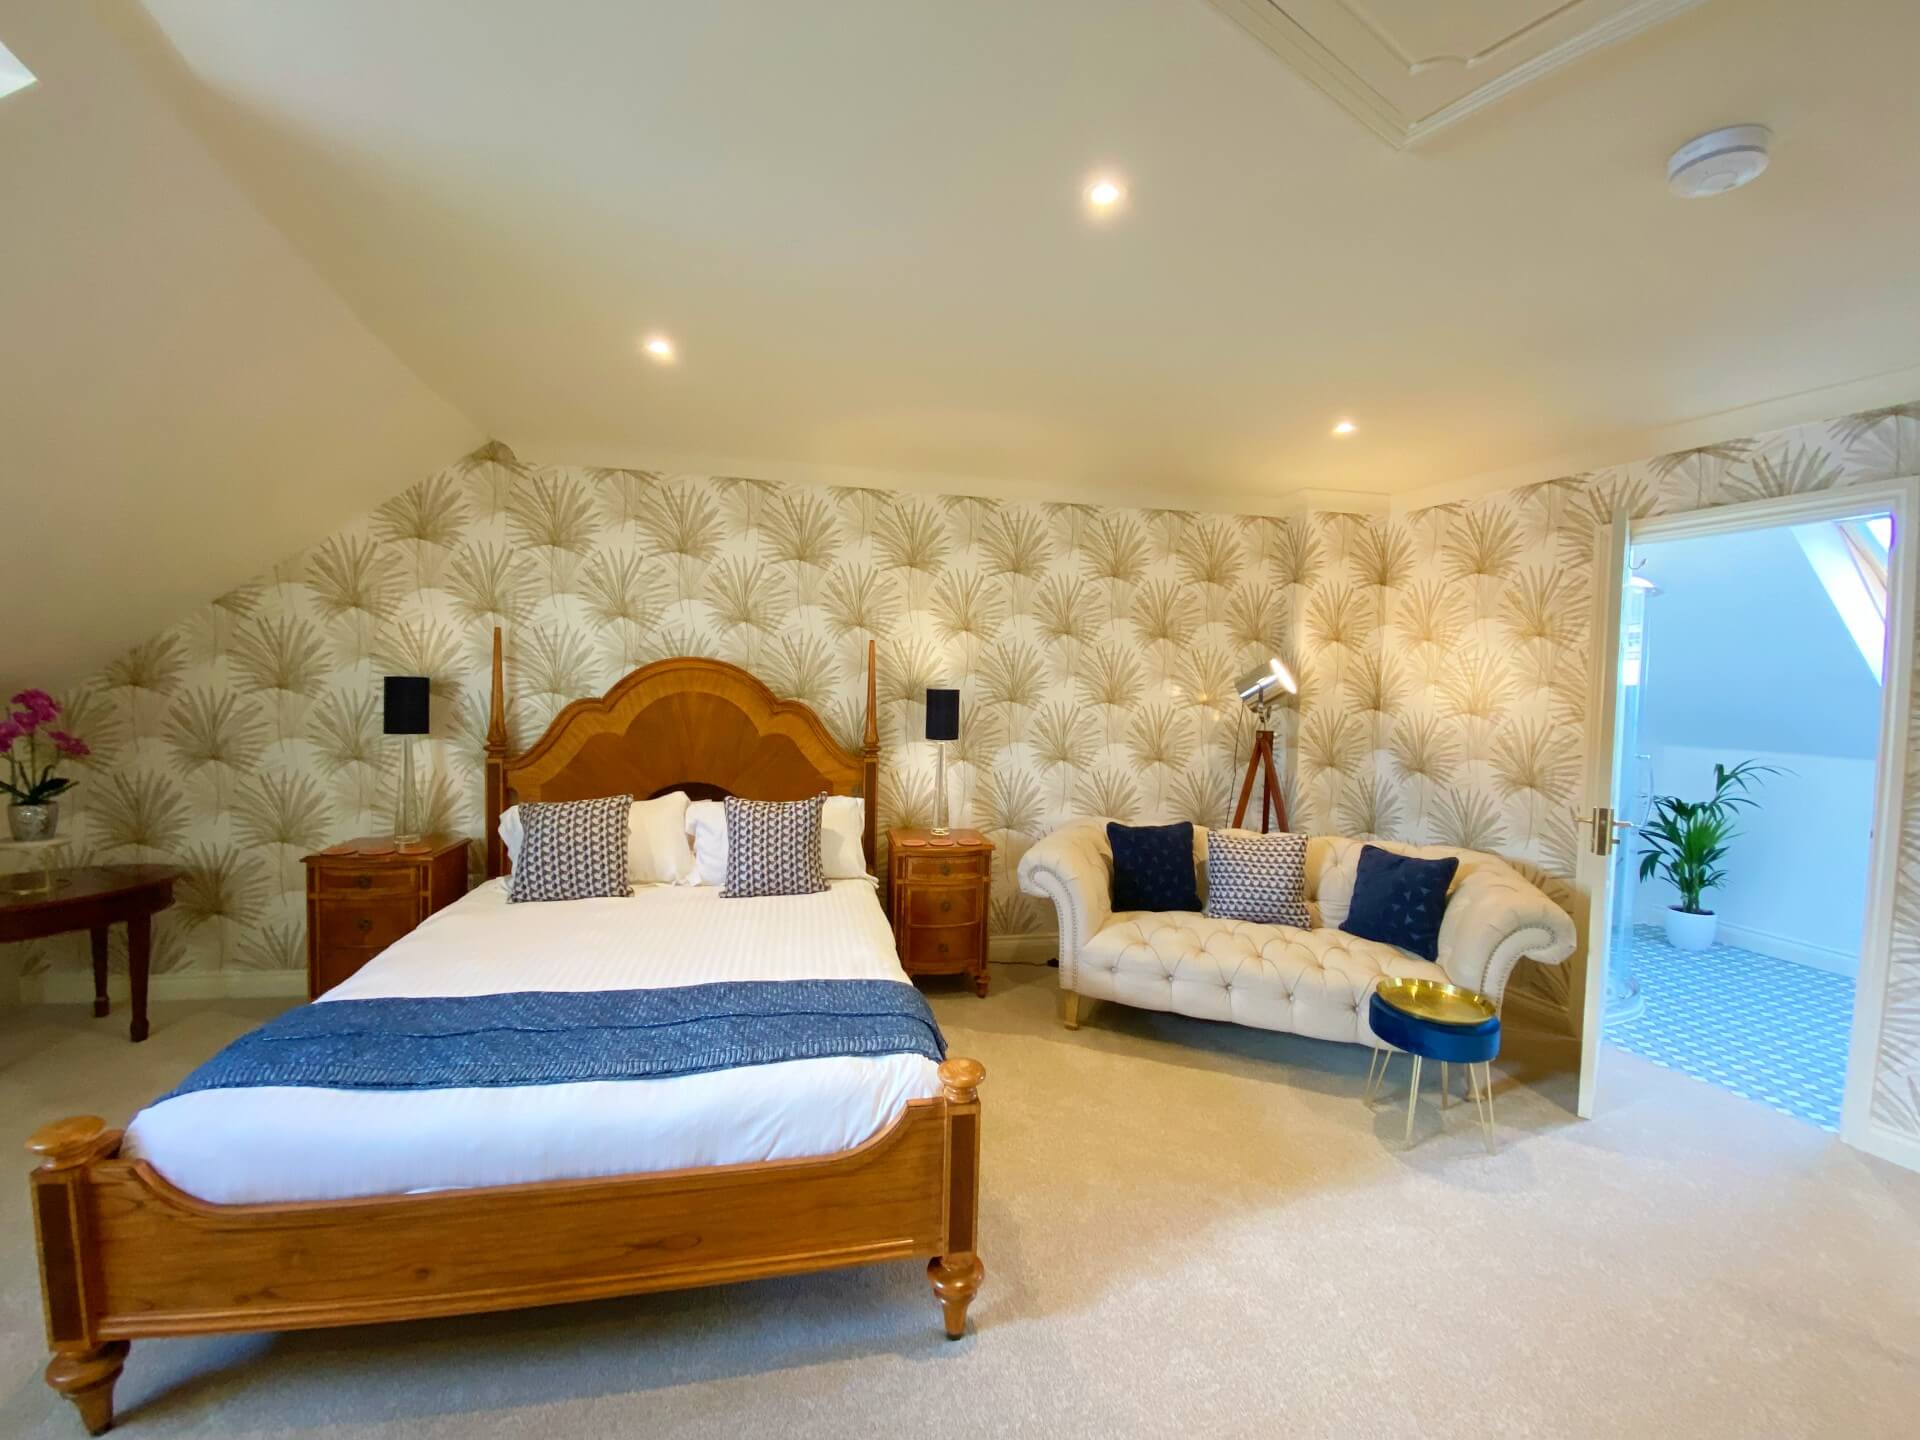 Lisburne Place Luxury Town House self catering accommodation - main bedroom